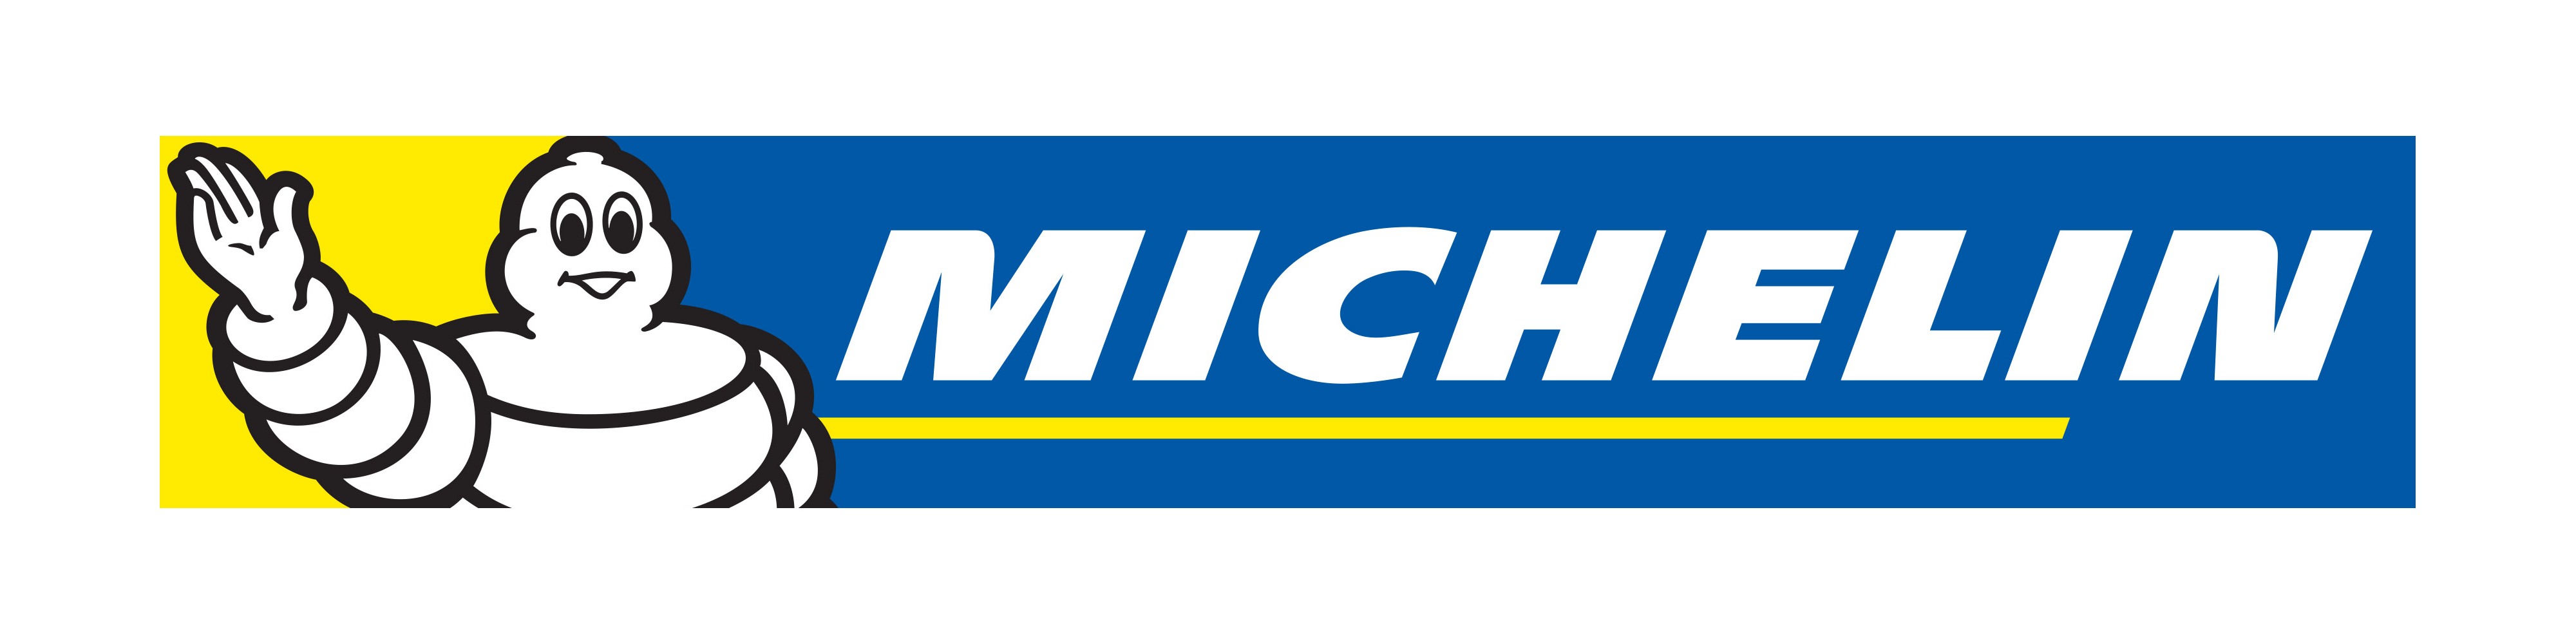 4000X1000 Hd Png - Michelin, Transparent background PNG HD thumbnail